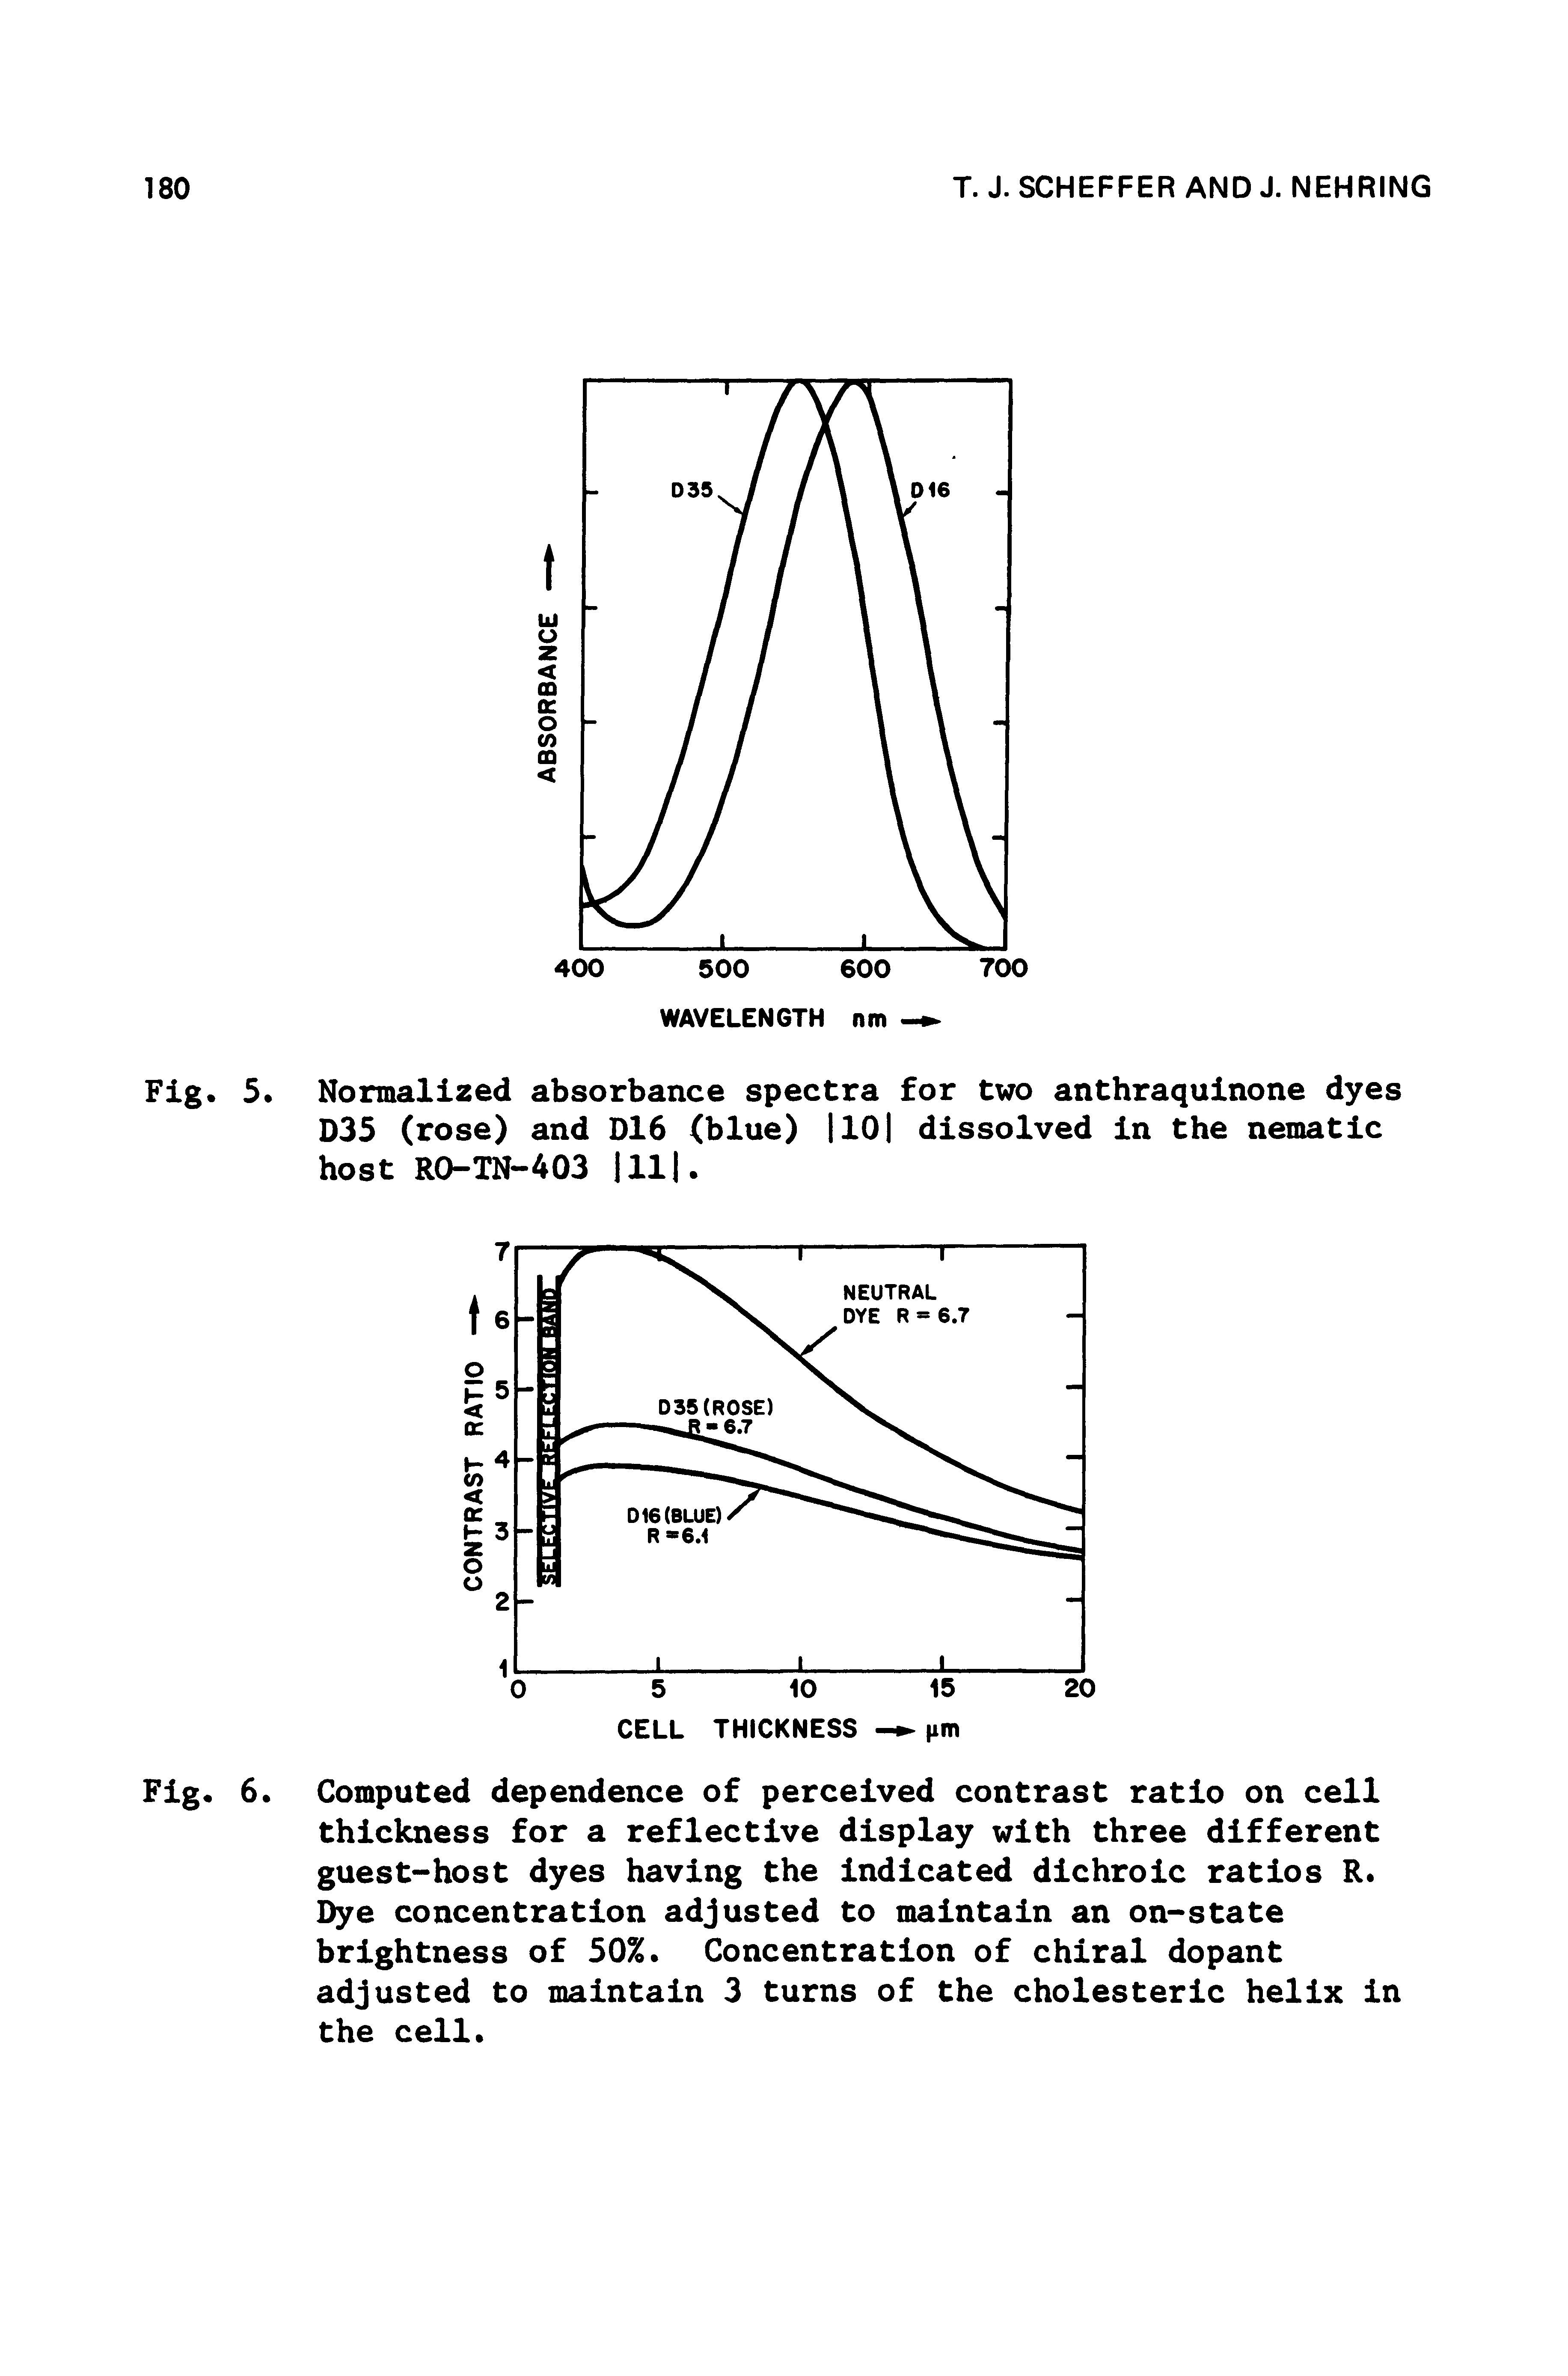 Fig. 6. Computed dependence of perceived contrast ratio on cell thickness for a reflective display with three different guest-host dyes having the indicated dichroic ratios R. Dye concentration adjusted to maintain an on-state brightness of 50%. Concentration of chiral dopant adjusted to maintain 3 turns of the cholesteric helix in the cell.